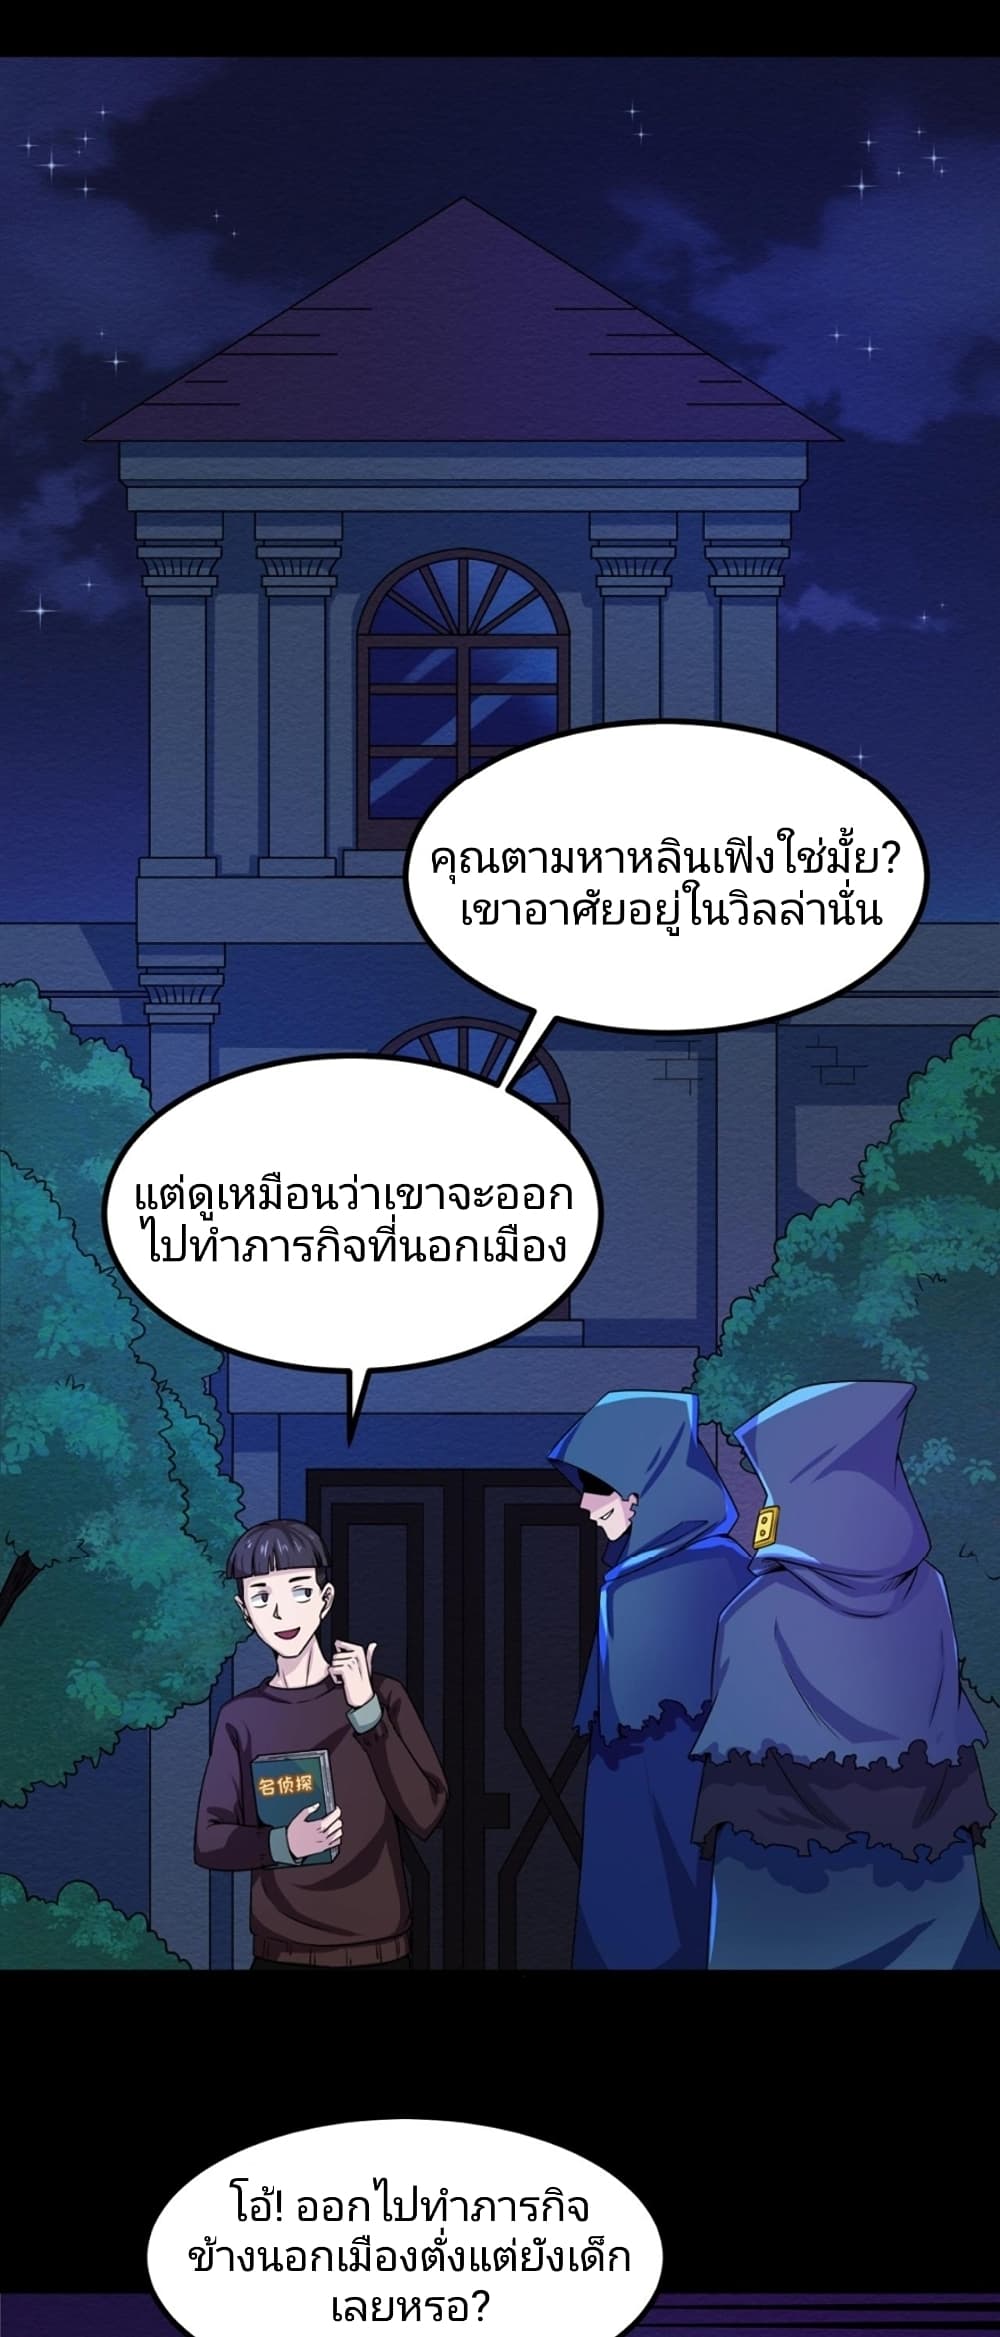 The Age of Ghost Spirits à¸à¸­à¸à¸à¸µà¹ 9 (3)